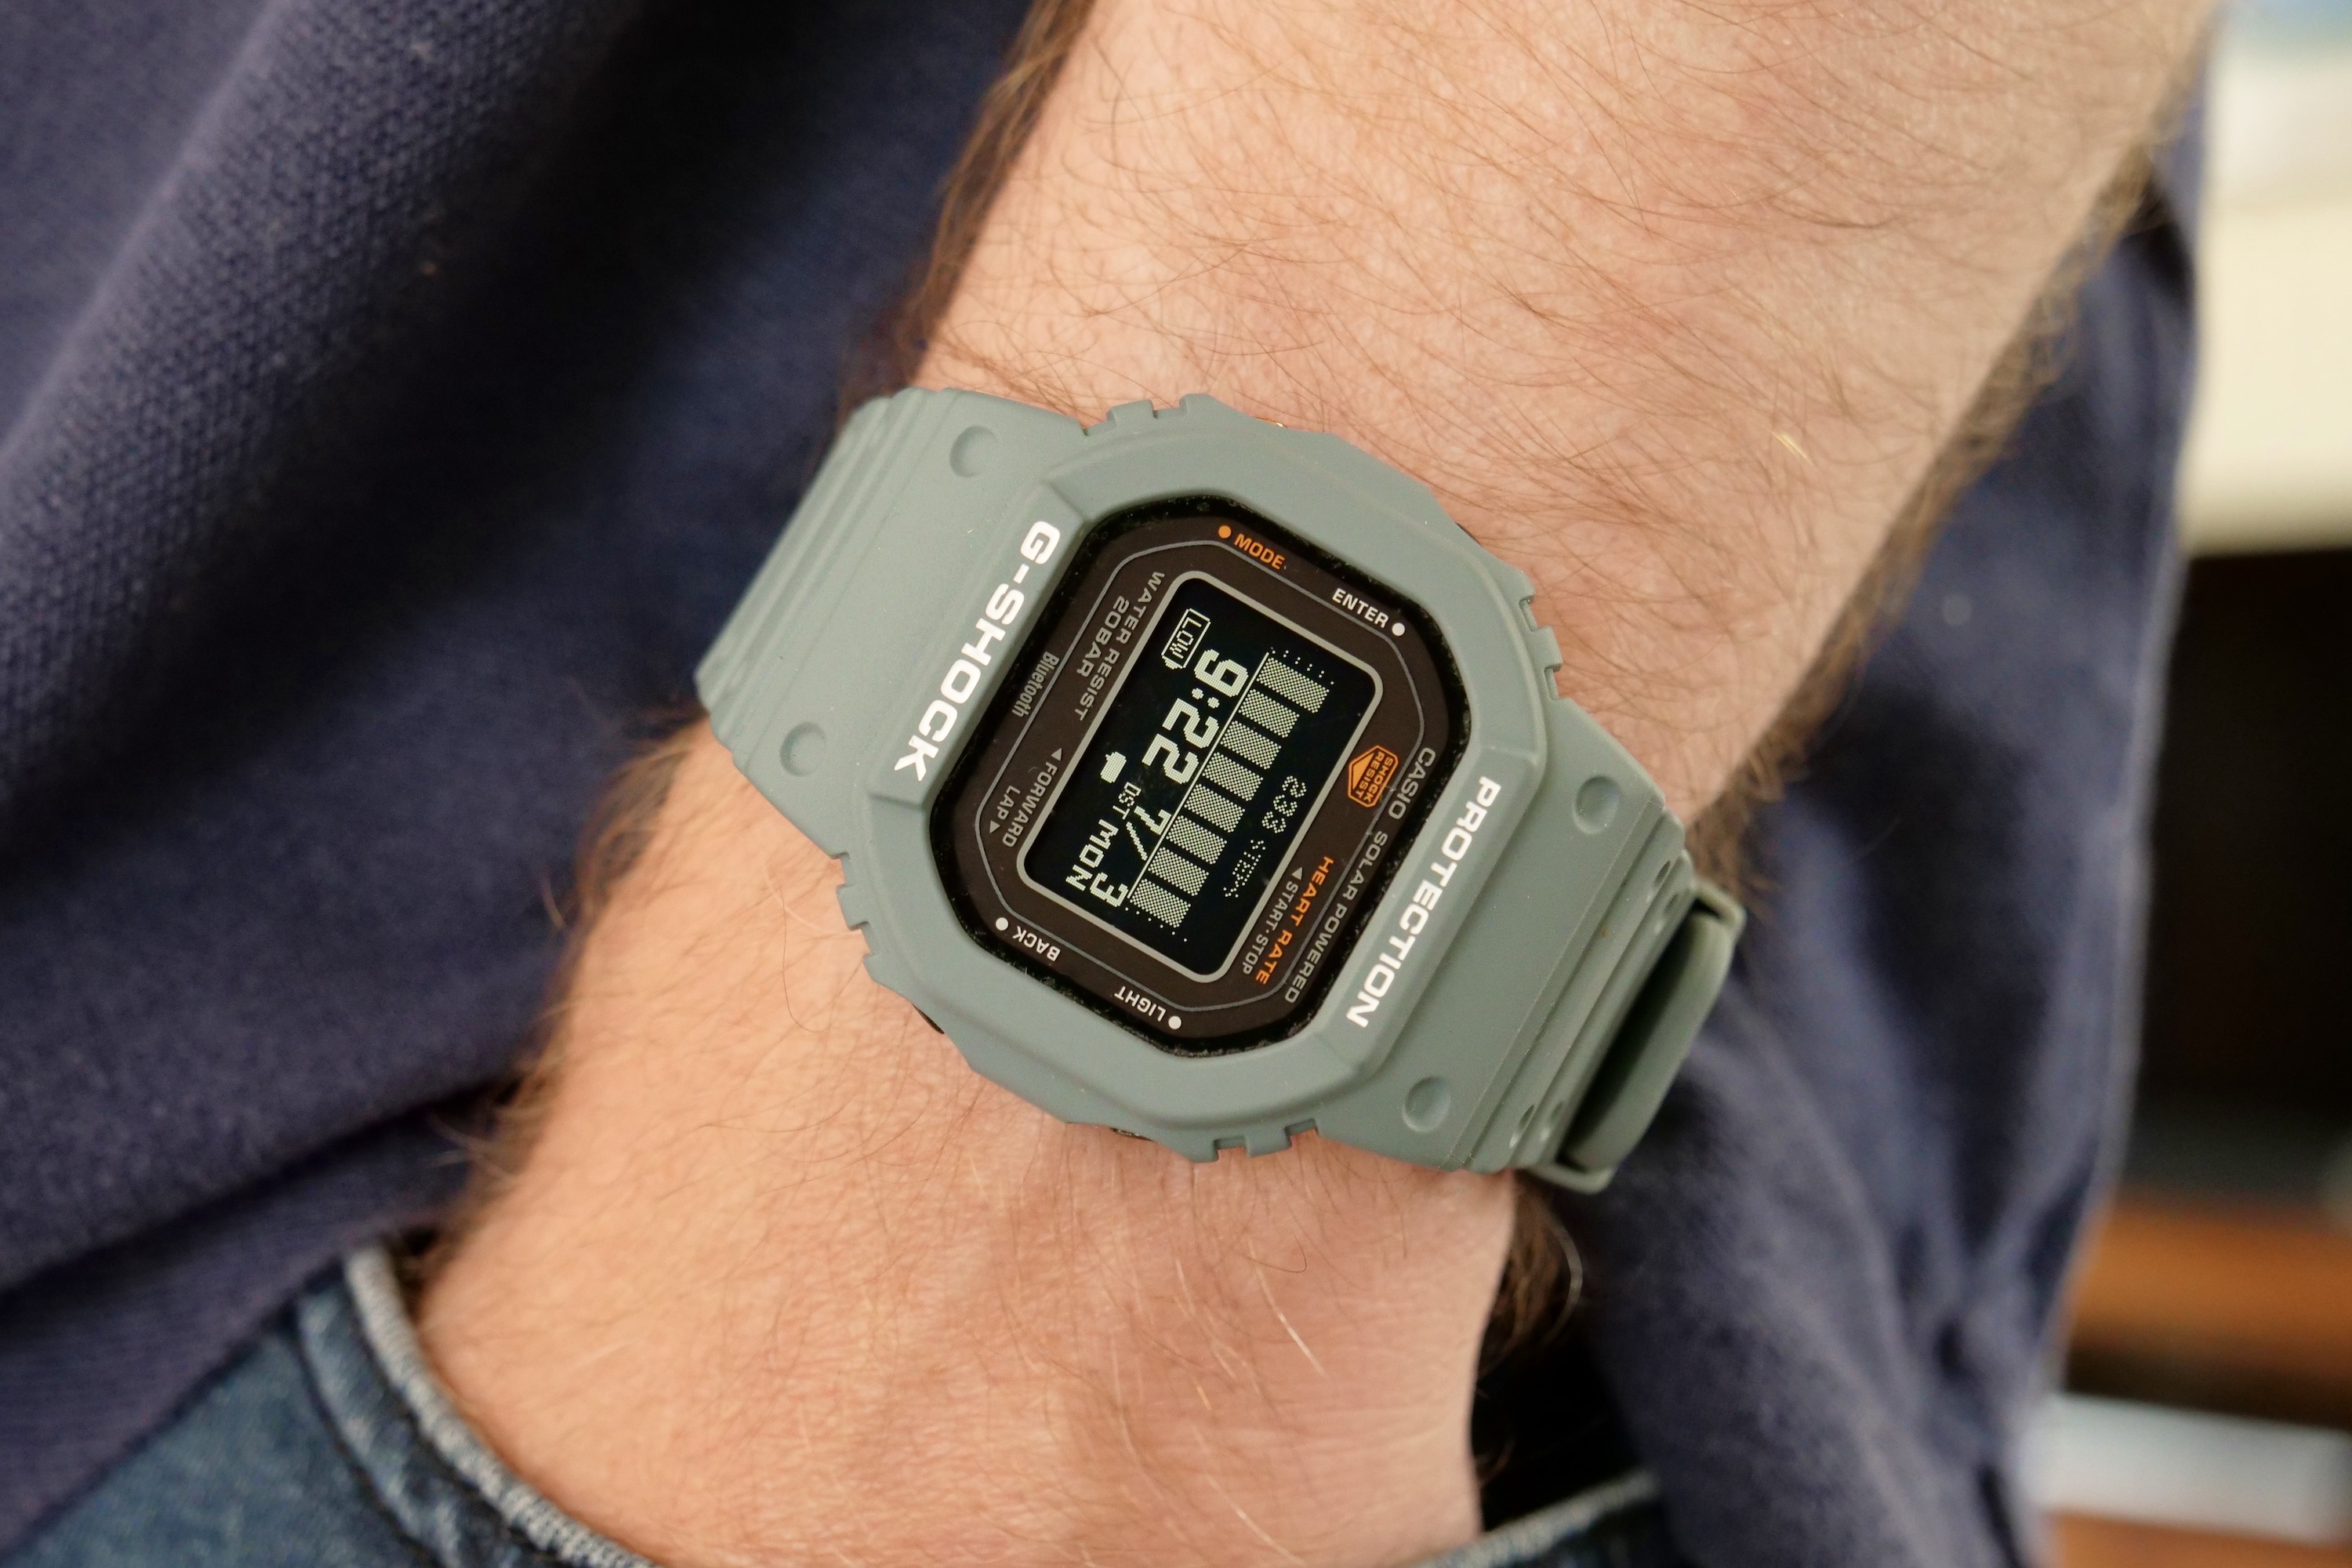 Casio DW5600 Review — LATEST REVIEWS — Ben's Watch Club